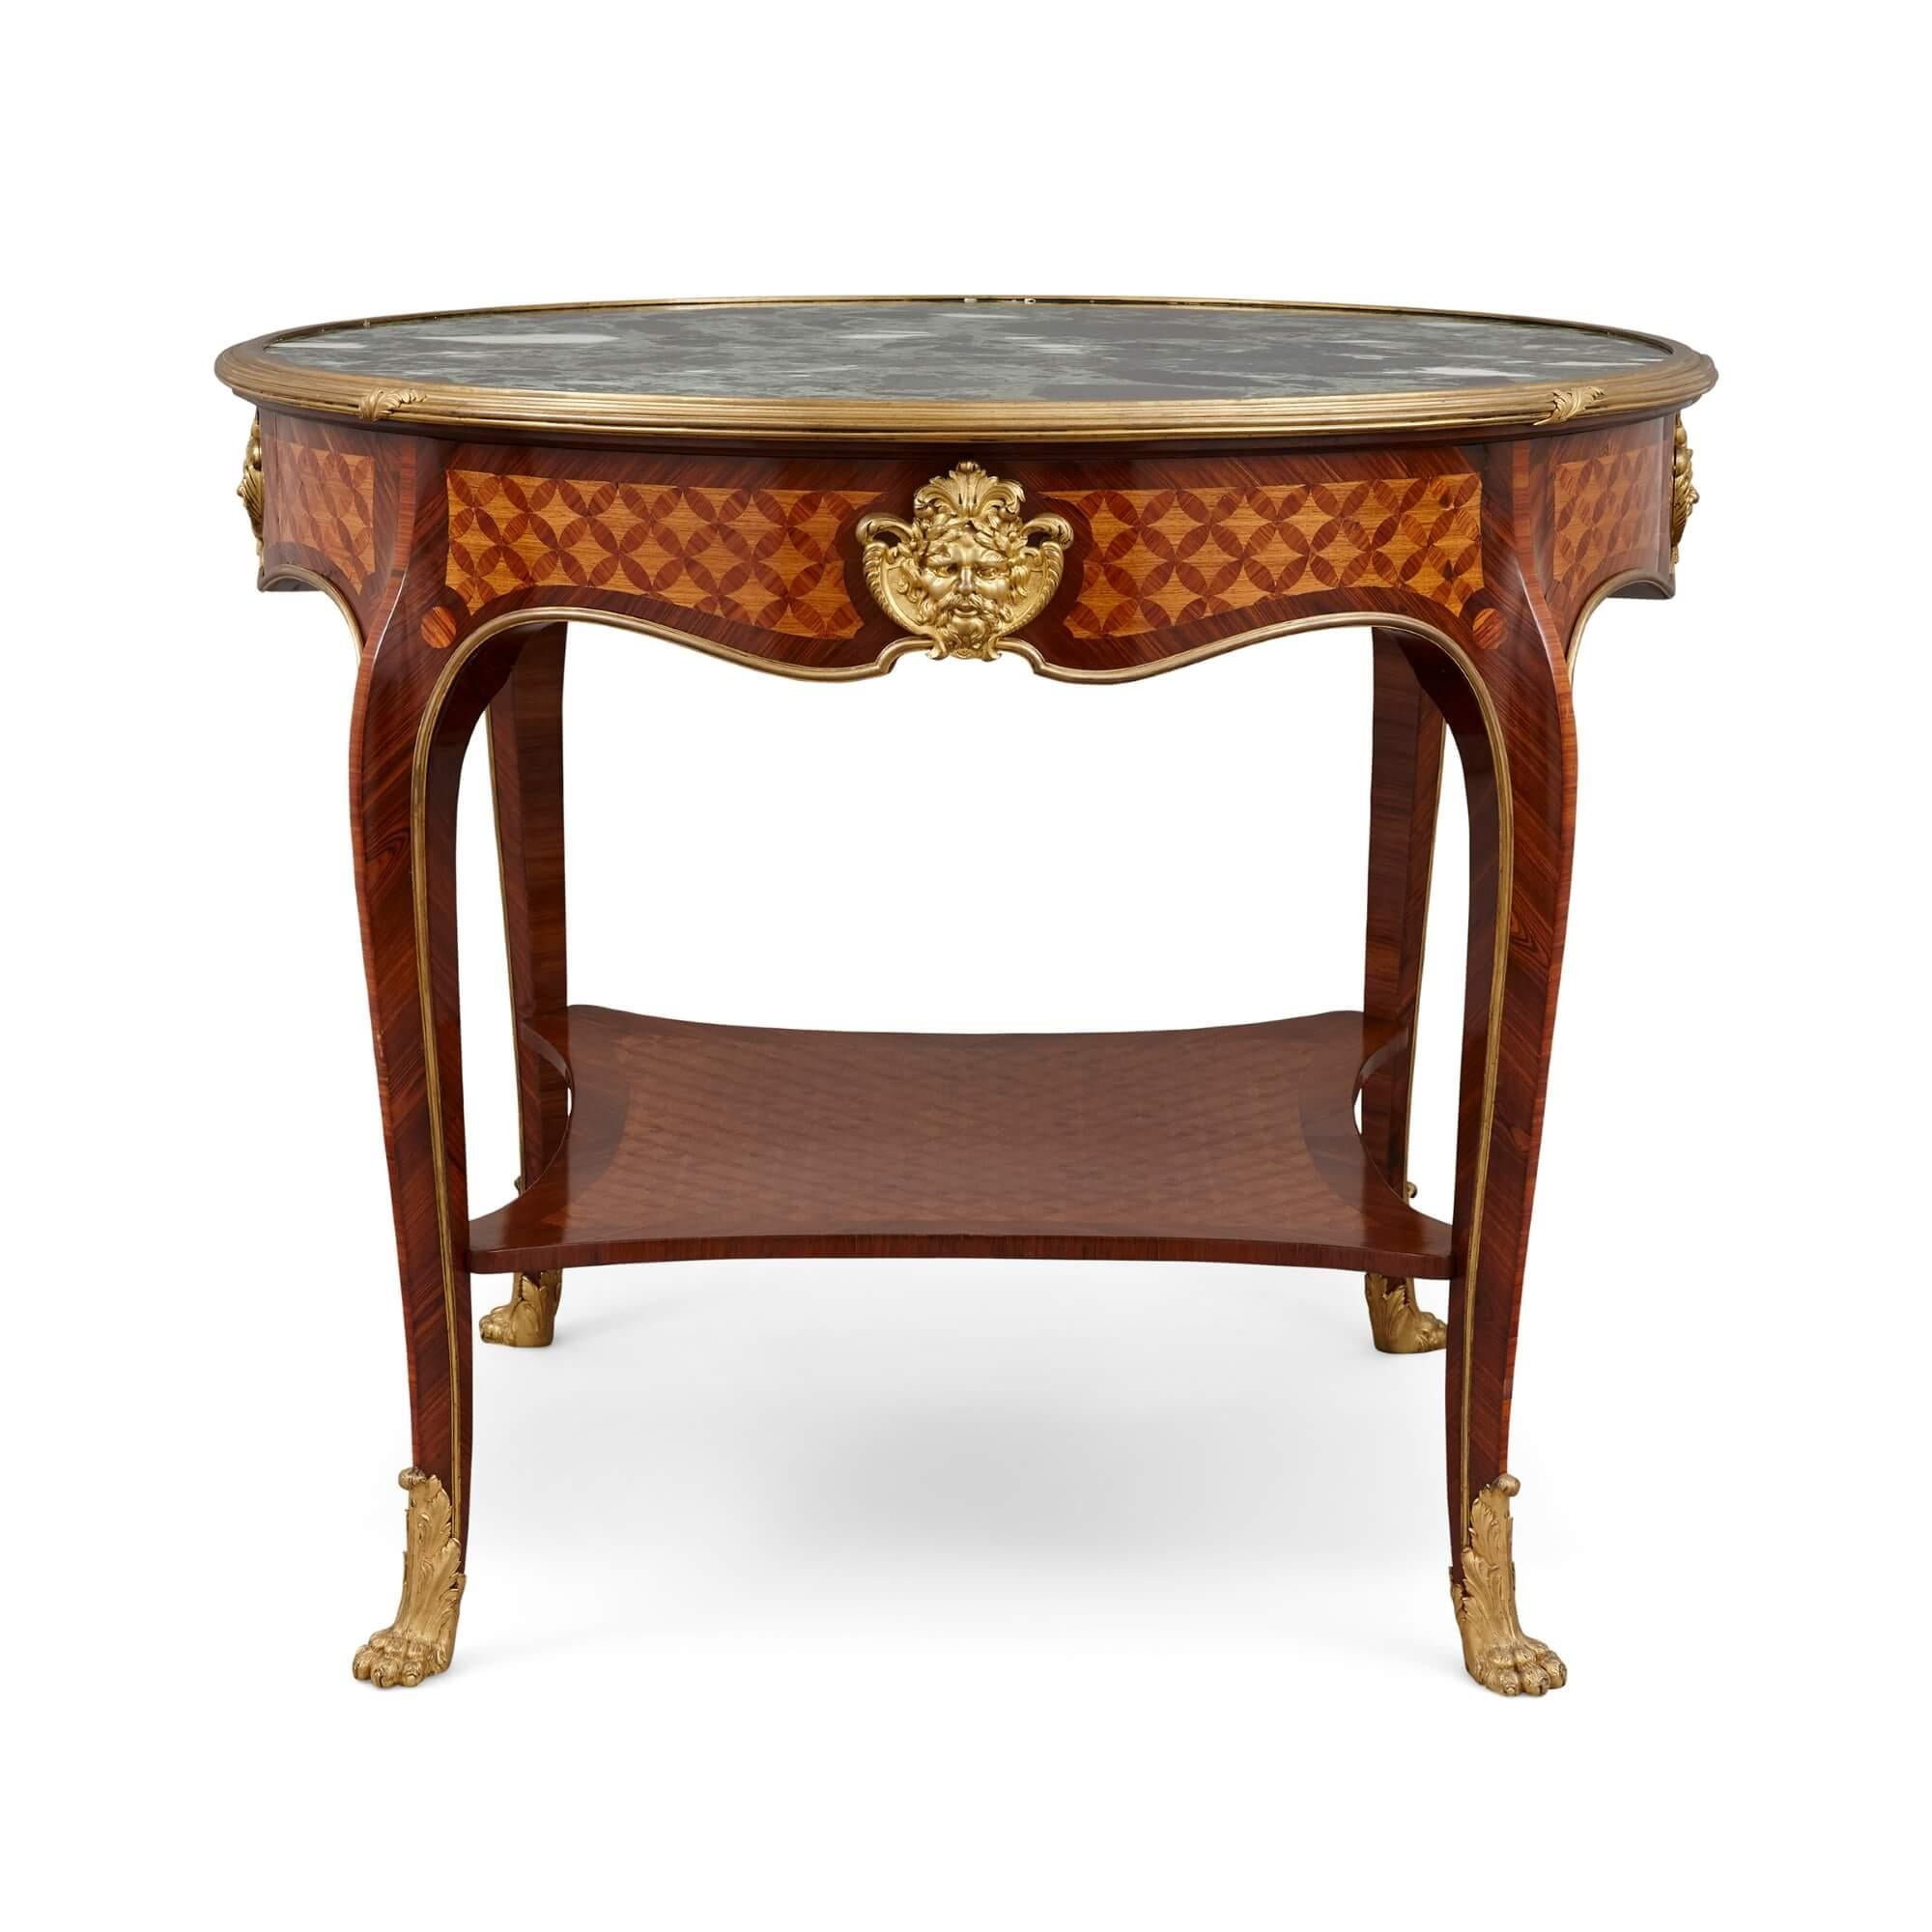 This superb piece is an antique ormolu mounted Louis XV style table, masterfully crafted with kingwood, tulipwood, and parquetry, by the famed Parisian firm L'Escalier de Cristal. The green marble top is set within a stepped surround, atop the